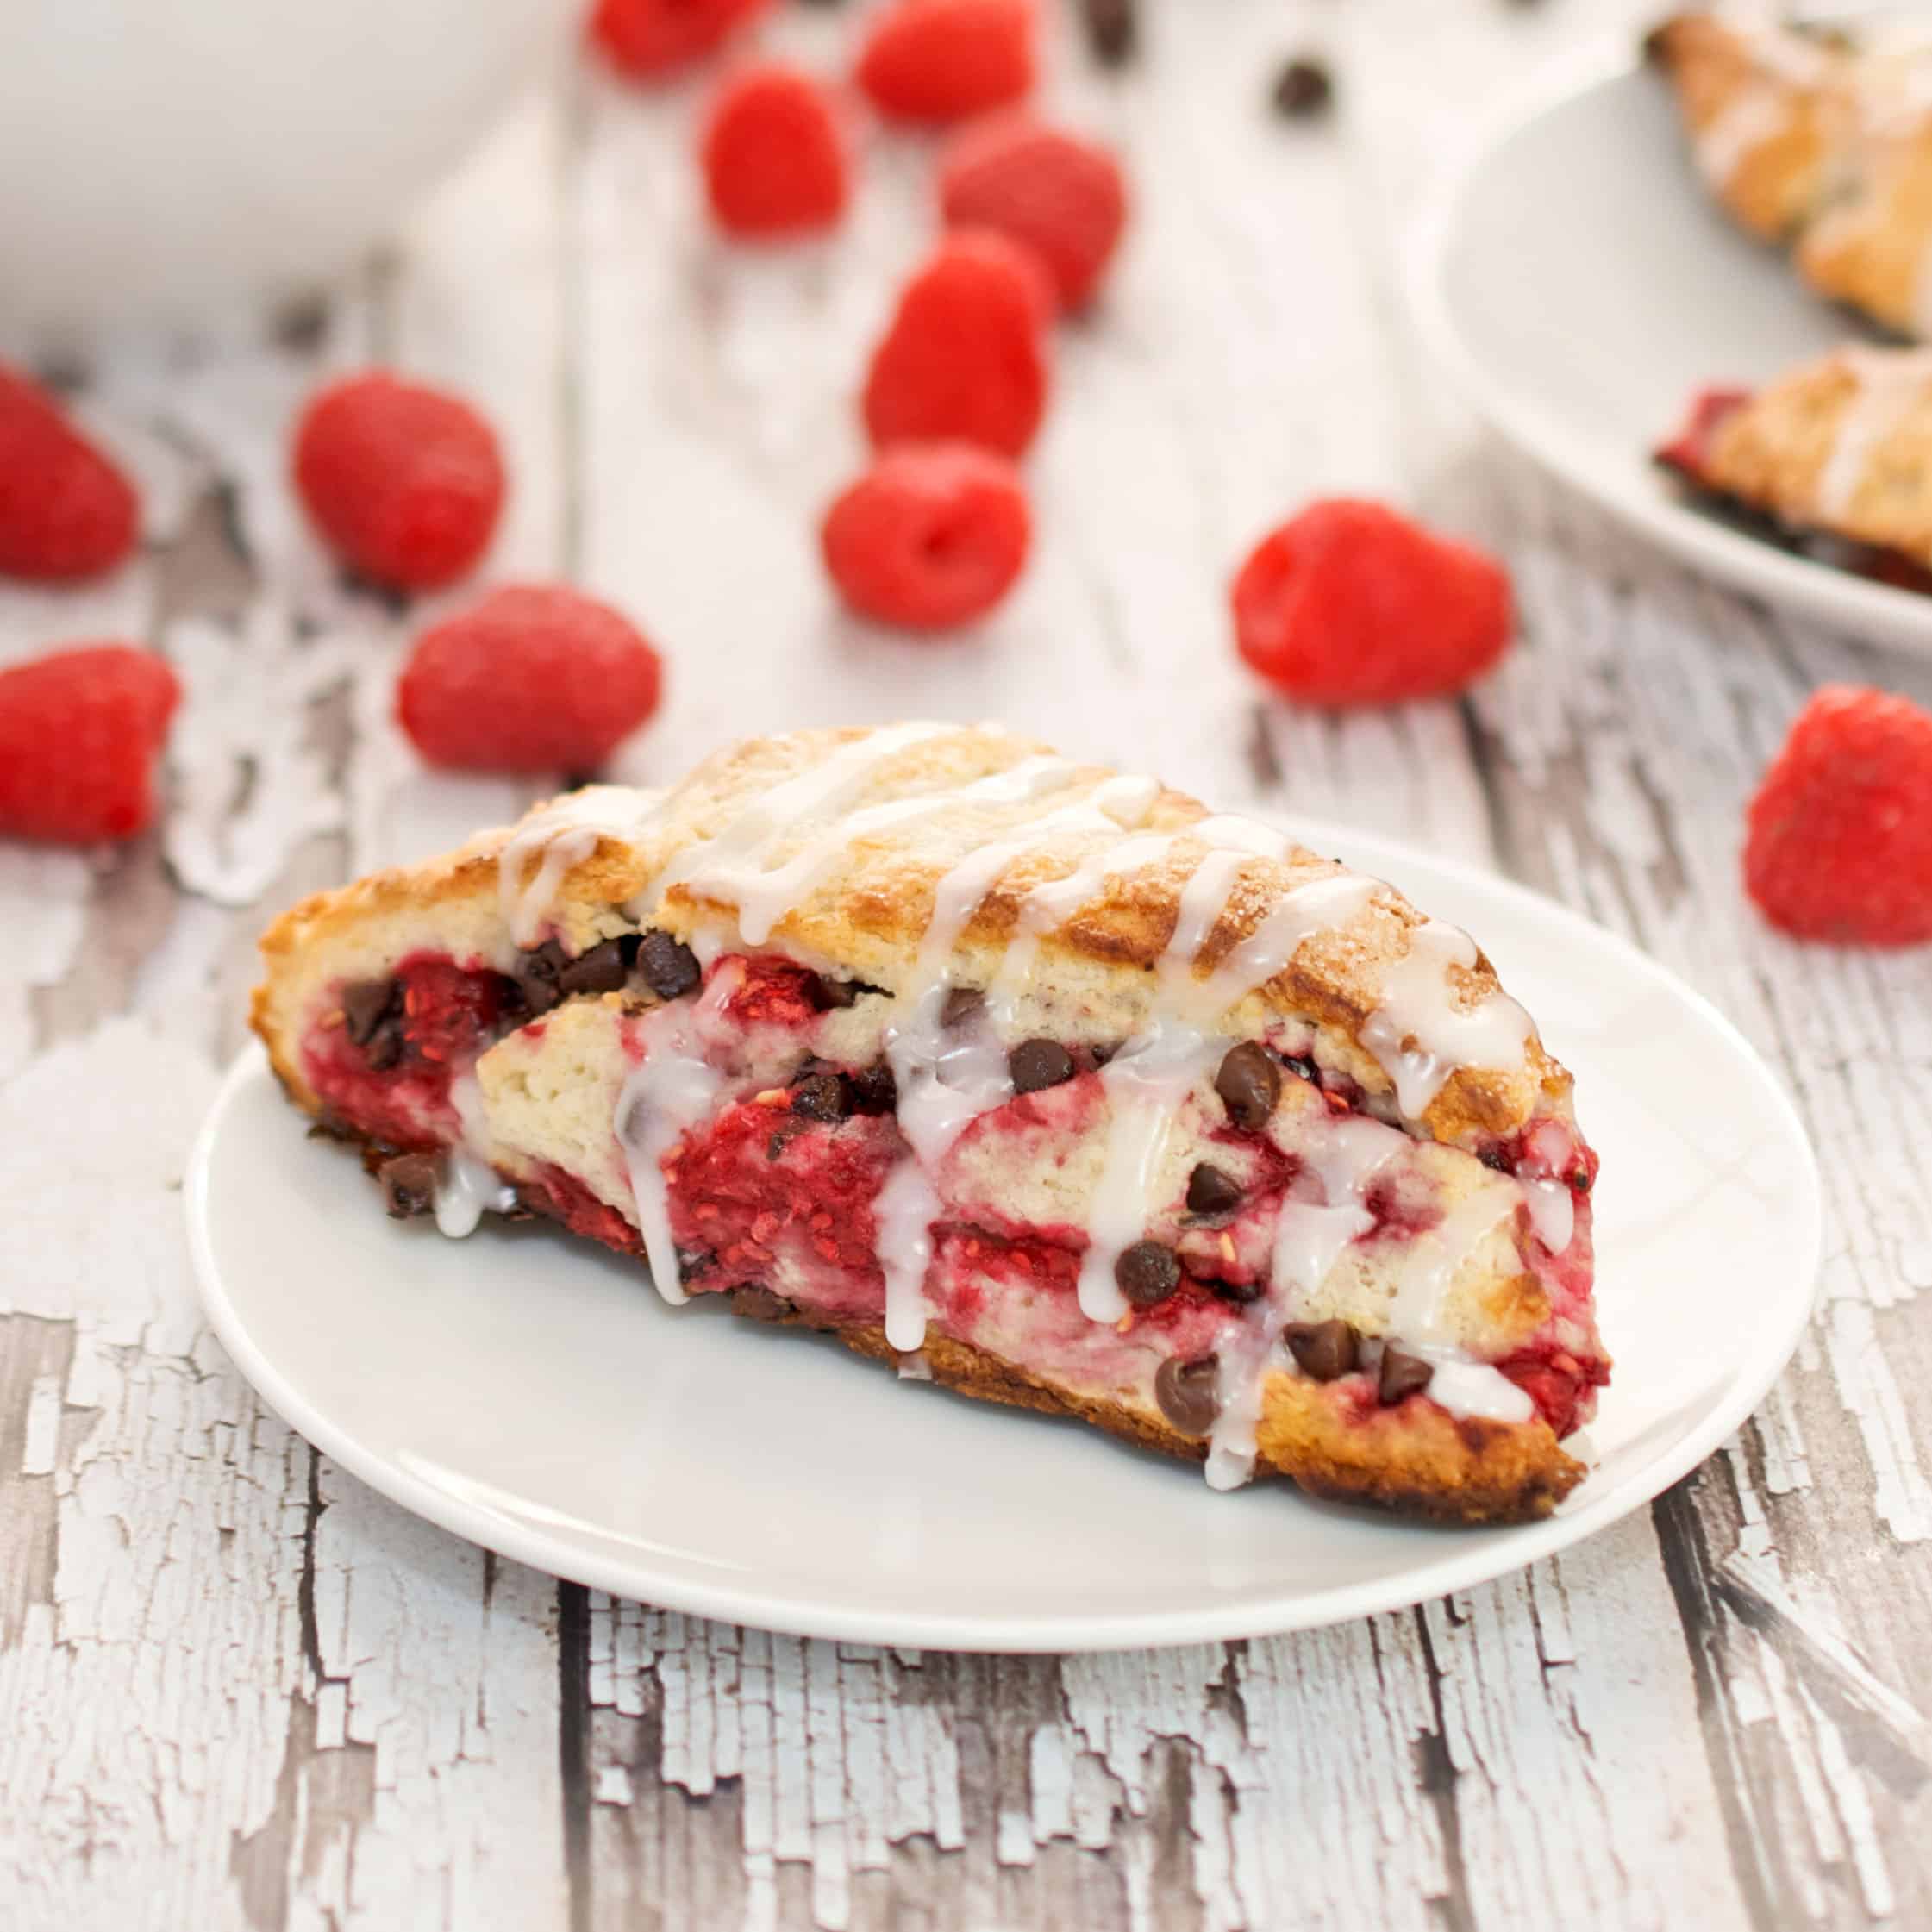 dark chocolate and raspberry scone on a plate with raspberries on the table